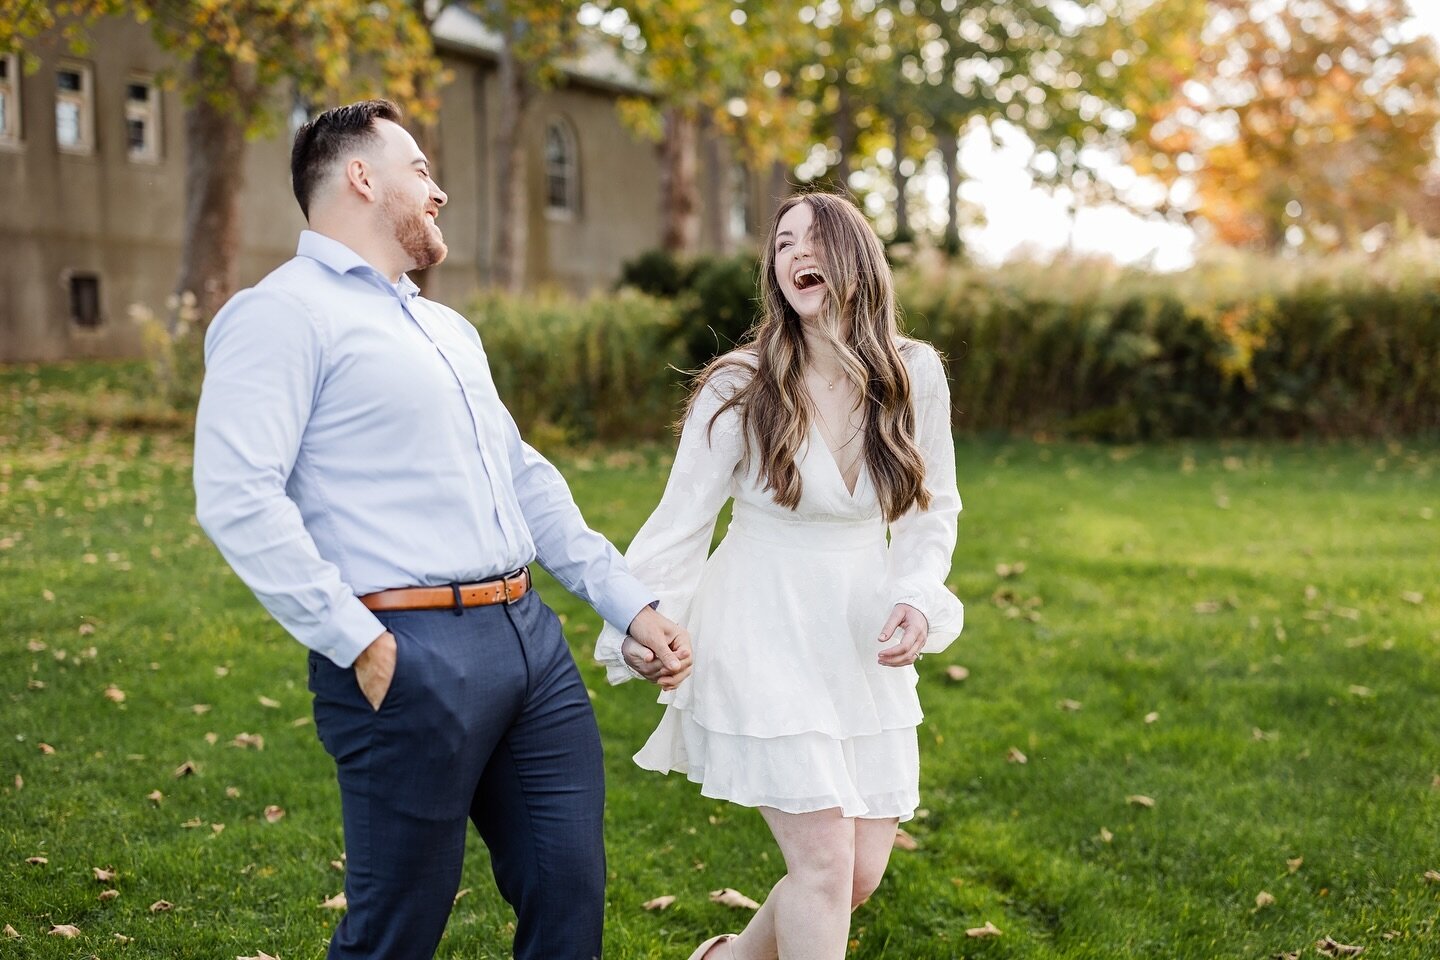 My product is guaranteed to make you laugh and have a ton of fun during your engagement session. I offer the corniest jokes, a lot of inappropriate humor, and a feeling of being super comfortable in front of the camera.

For a limited time offer, if 